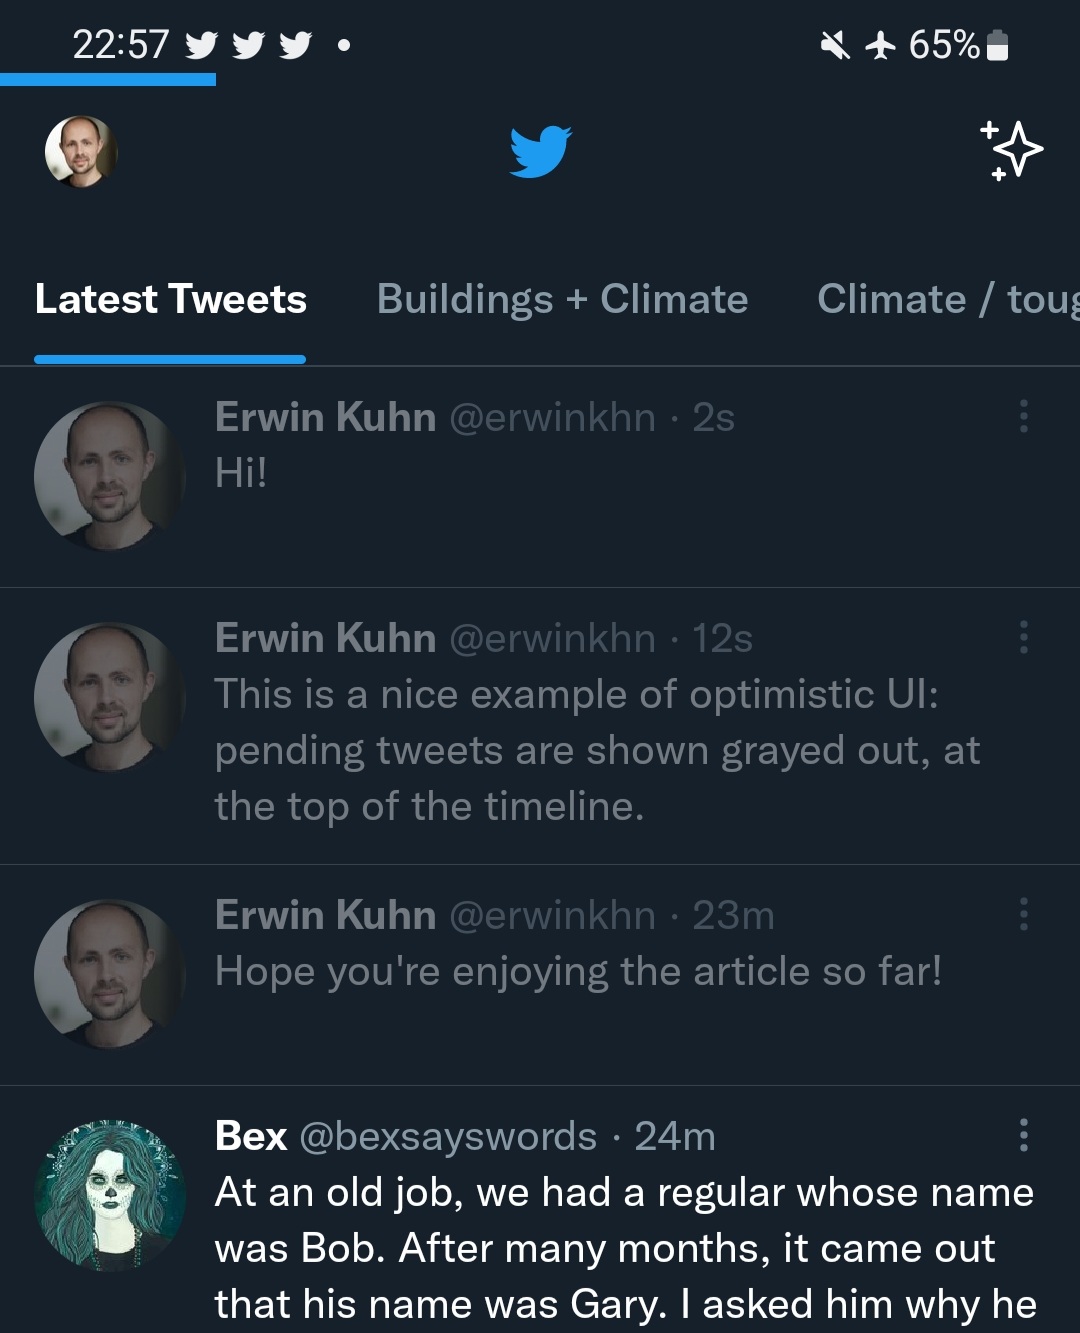 Twitter's timeline on their homescreen, with 3 pending tweets at the top, greyed out